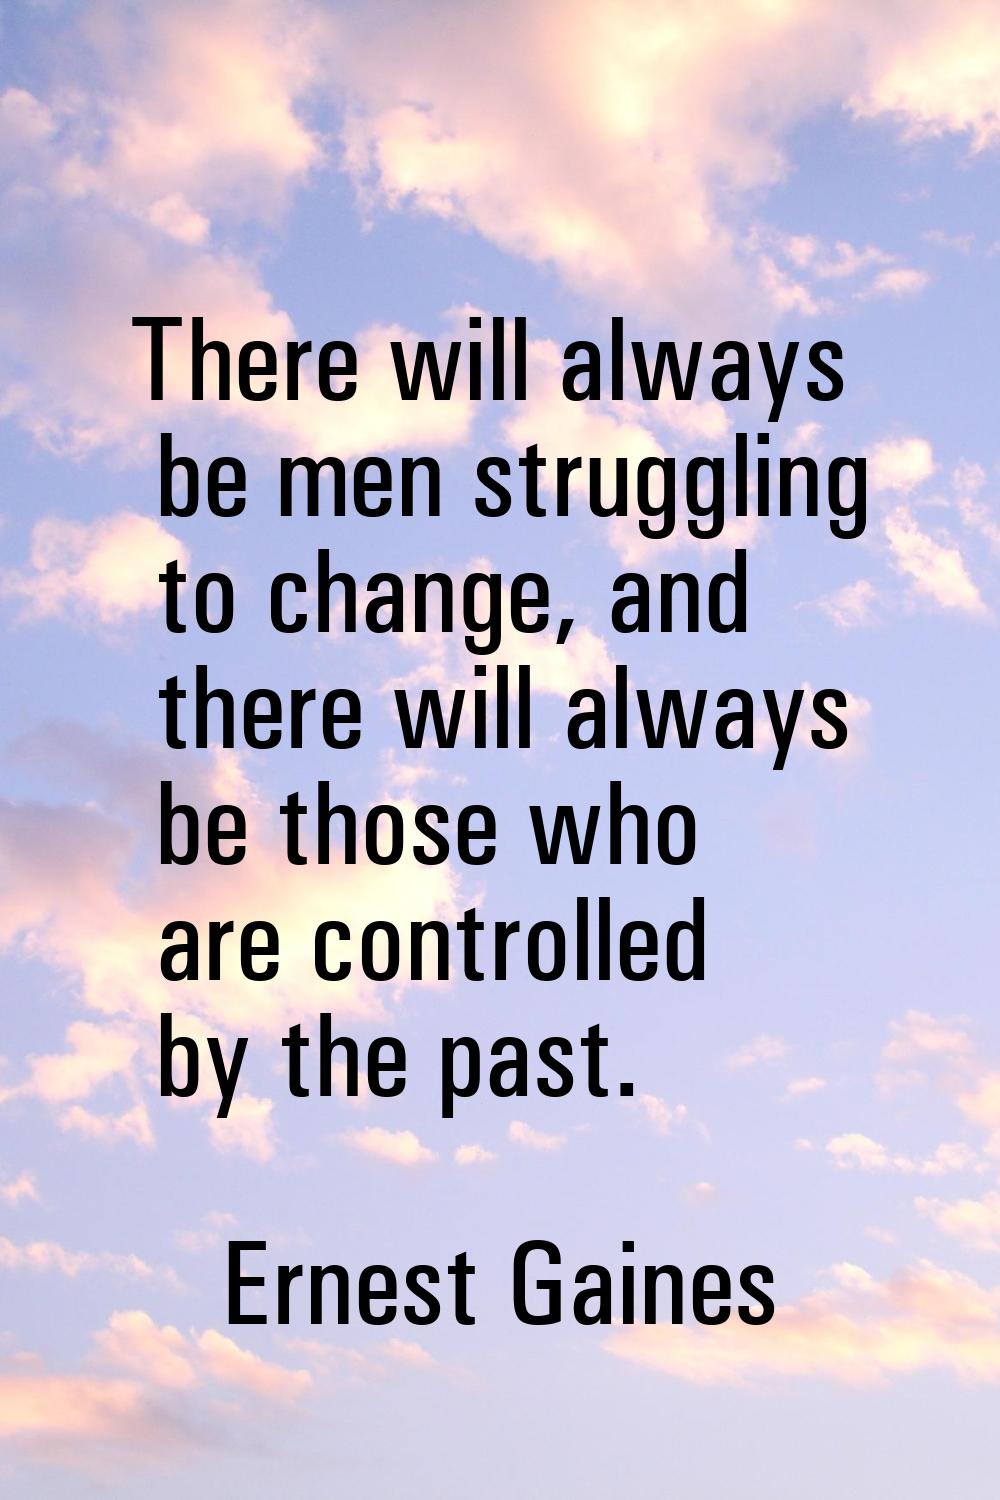 There will always be men struggling to change, and there will always be those who are controlled by